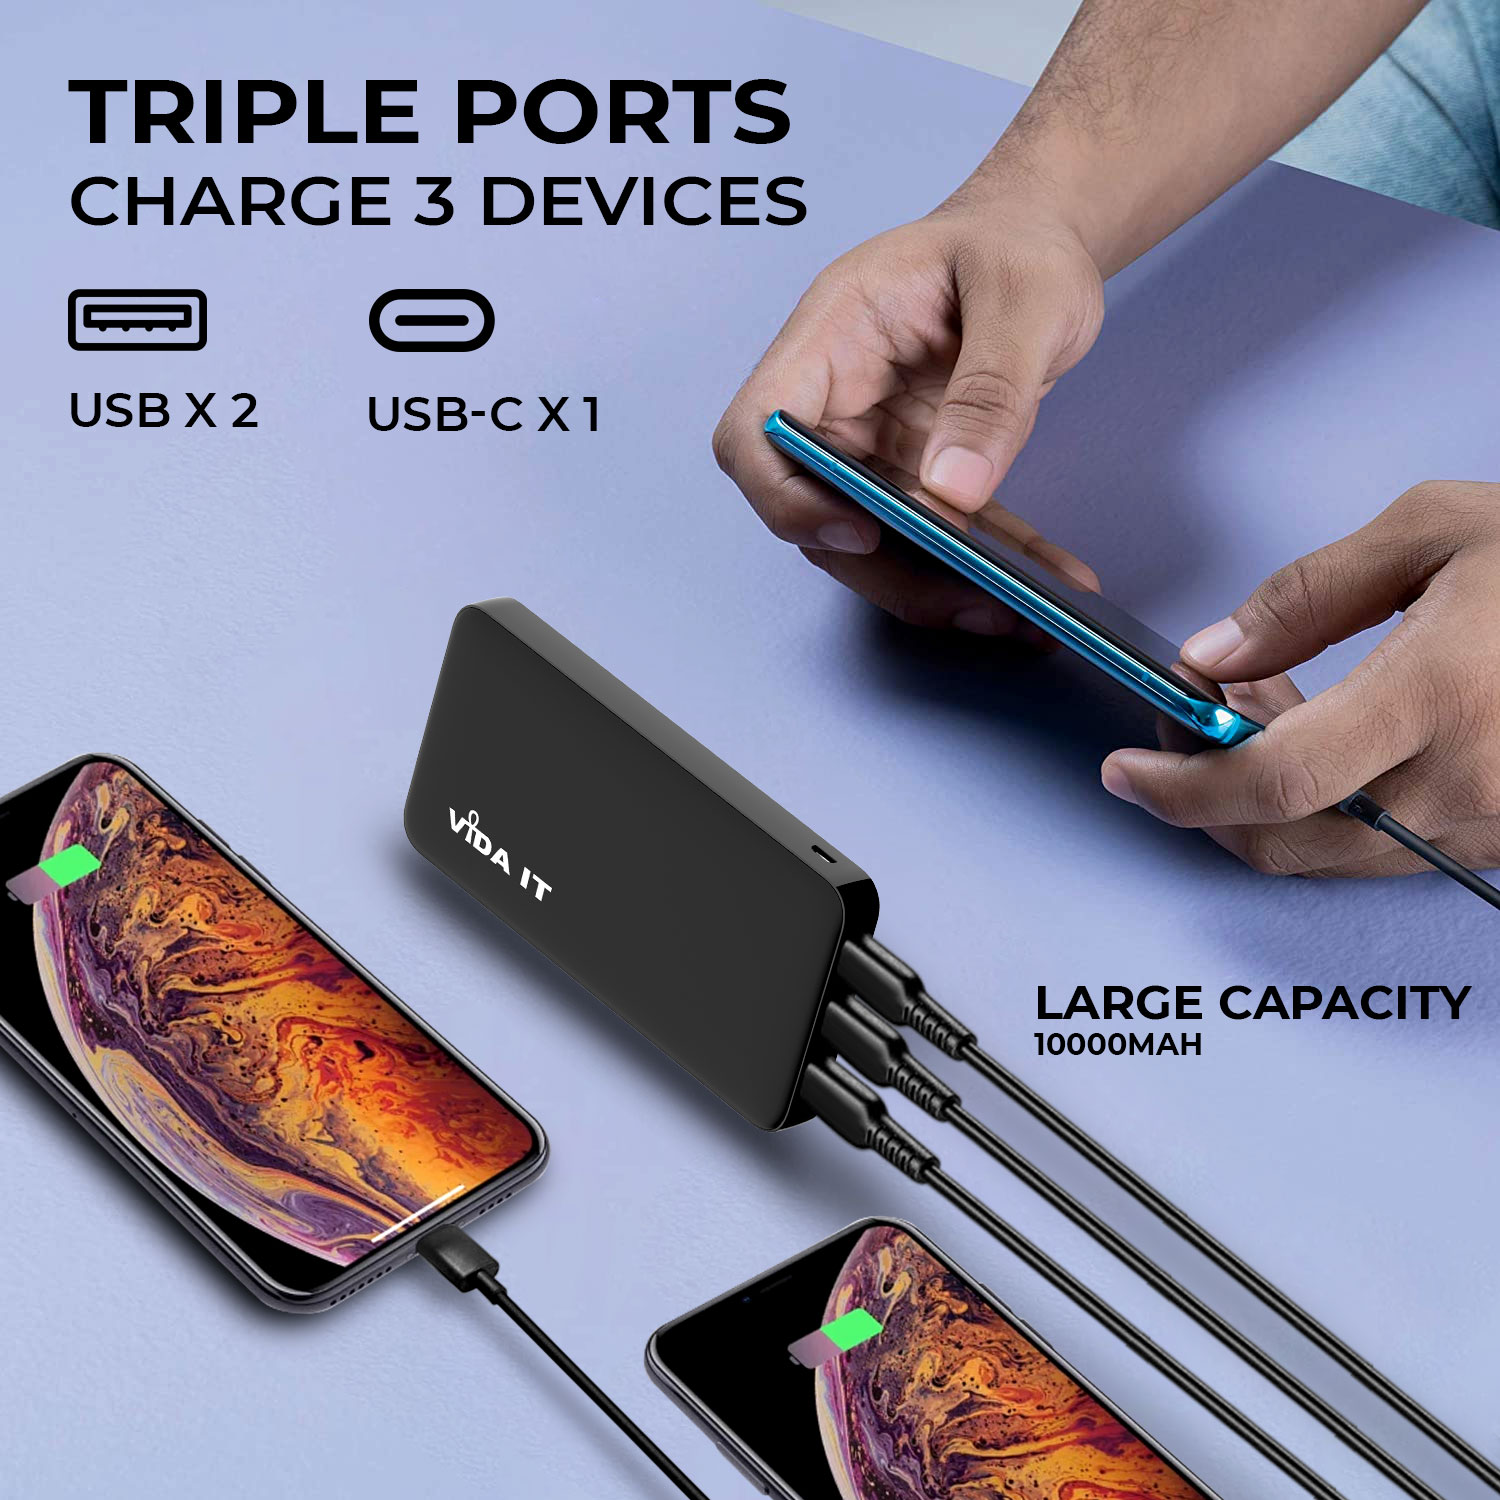 foldable compact slim thin travel socket portable Multiport 3 Ports USB wall charger power adapter fast 3.1A UK 3-pin plug adaptor mains universal for mobile phone tablet PC with cable Micro USB USB-C type-c Lightning